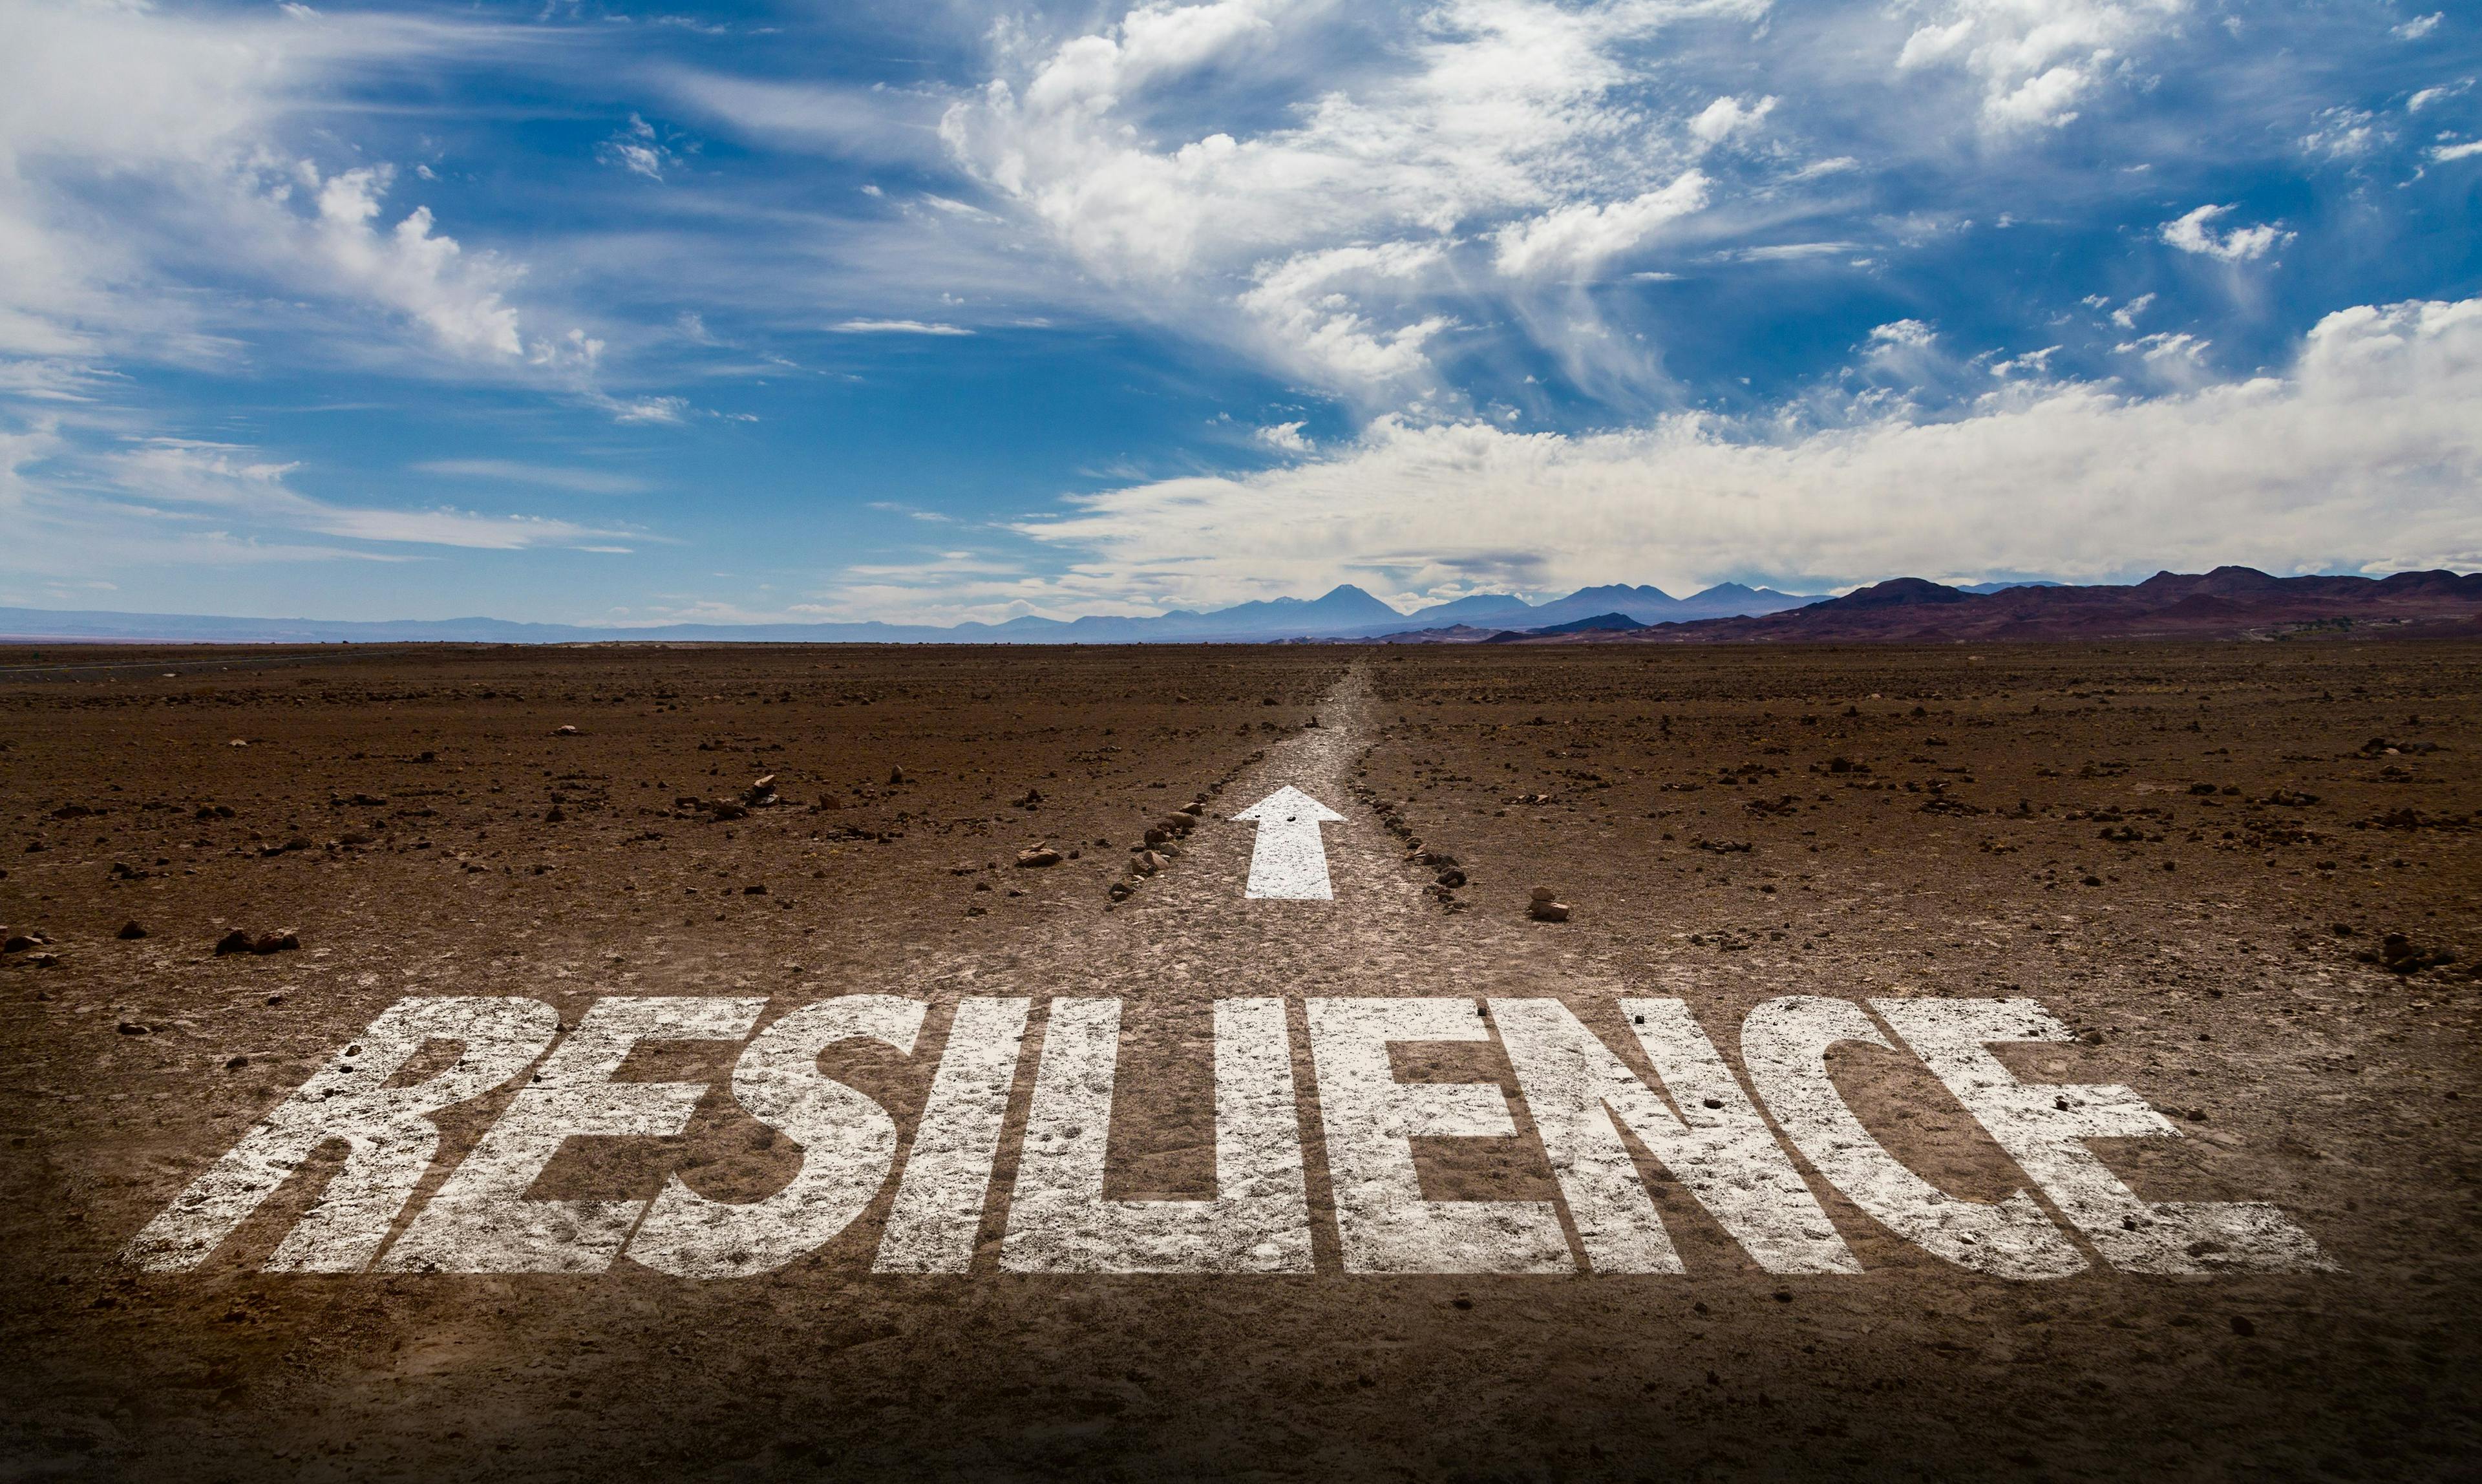 Building a Culture of Resiliency